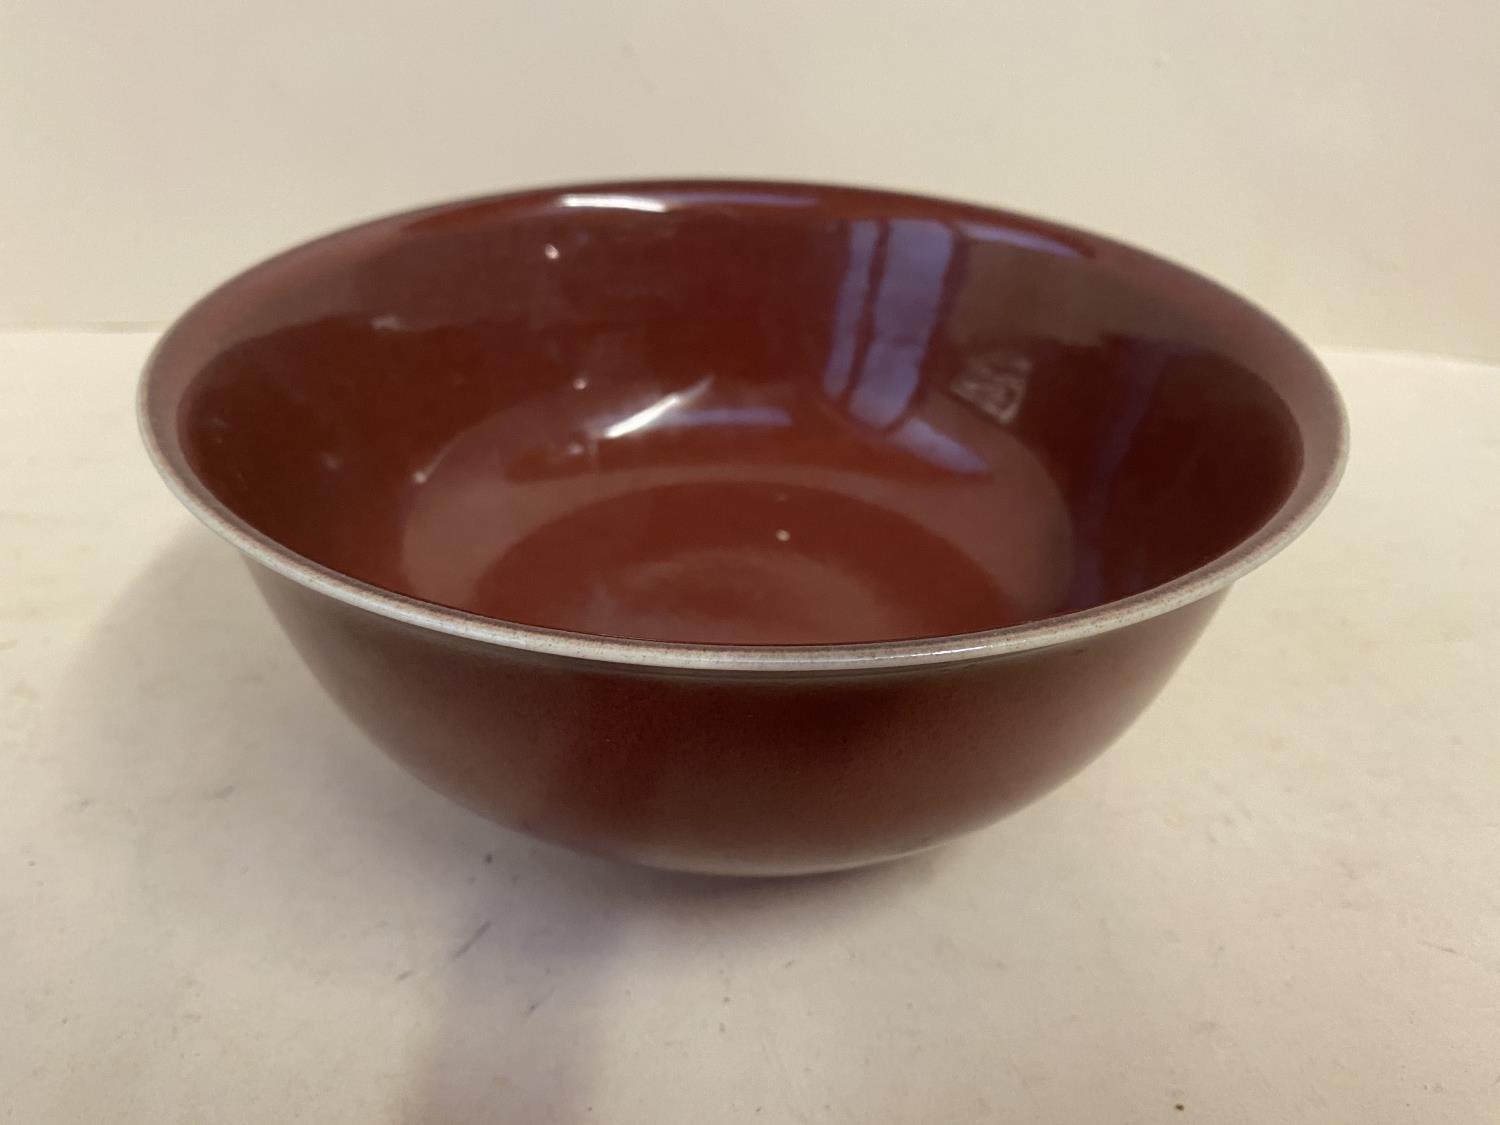 Chinese red bowl, with a crackle glaze to base, condition - crack and chips/minor frits to base